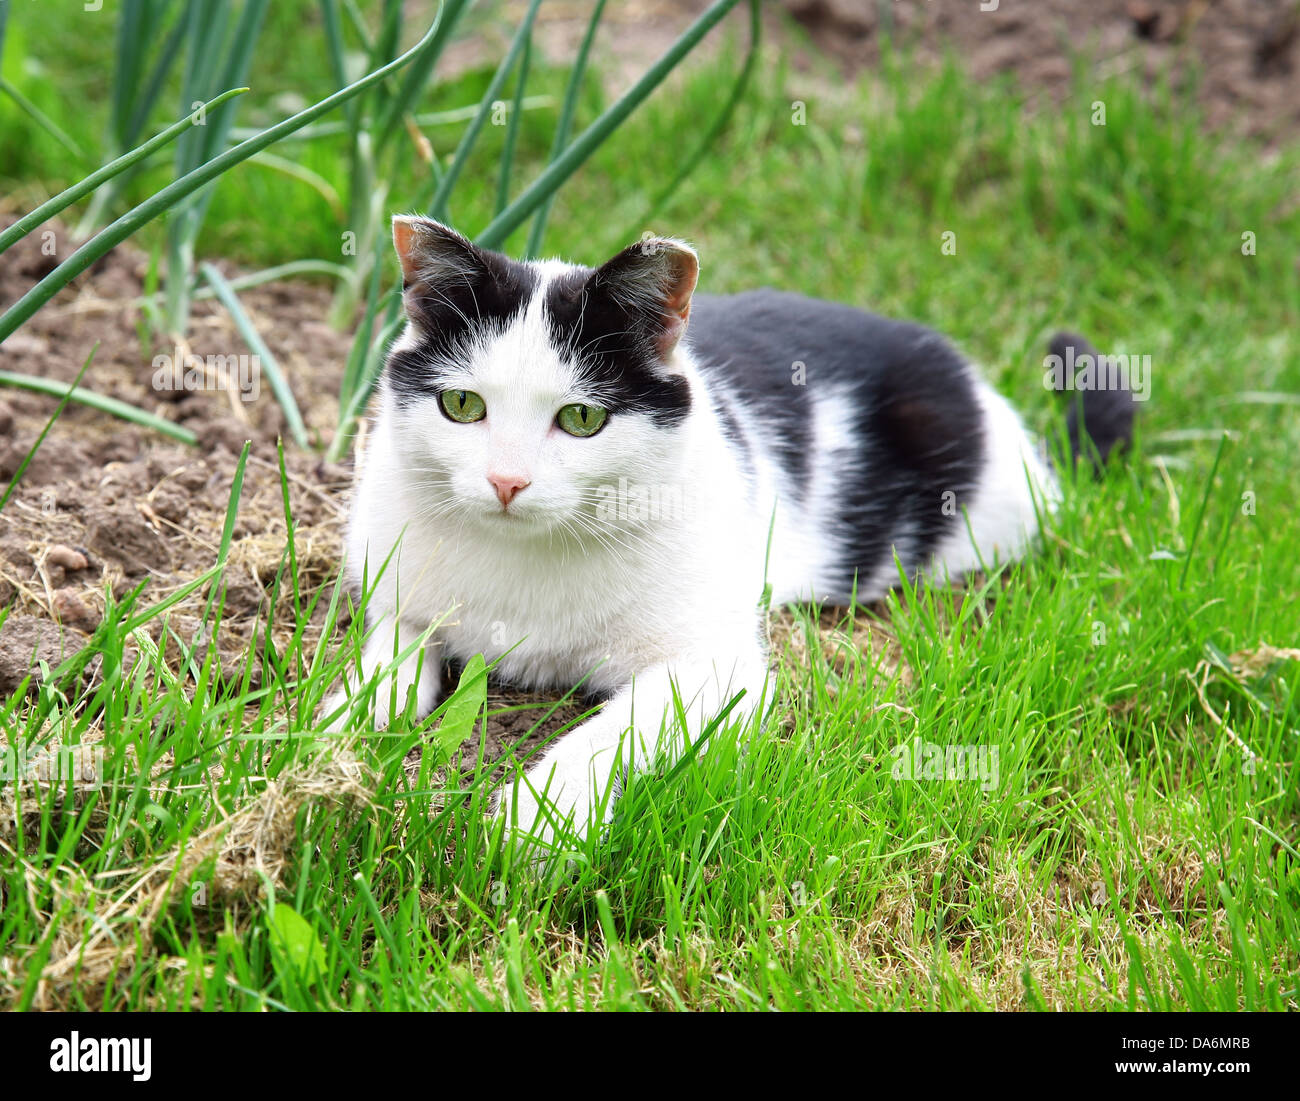 Black white cat hunting and looking for catch Stock Photo